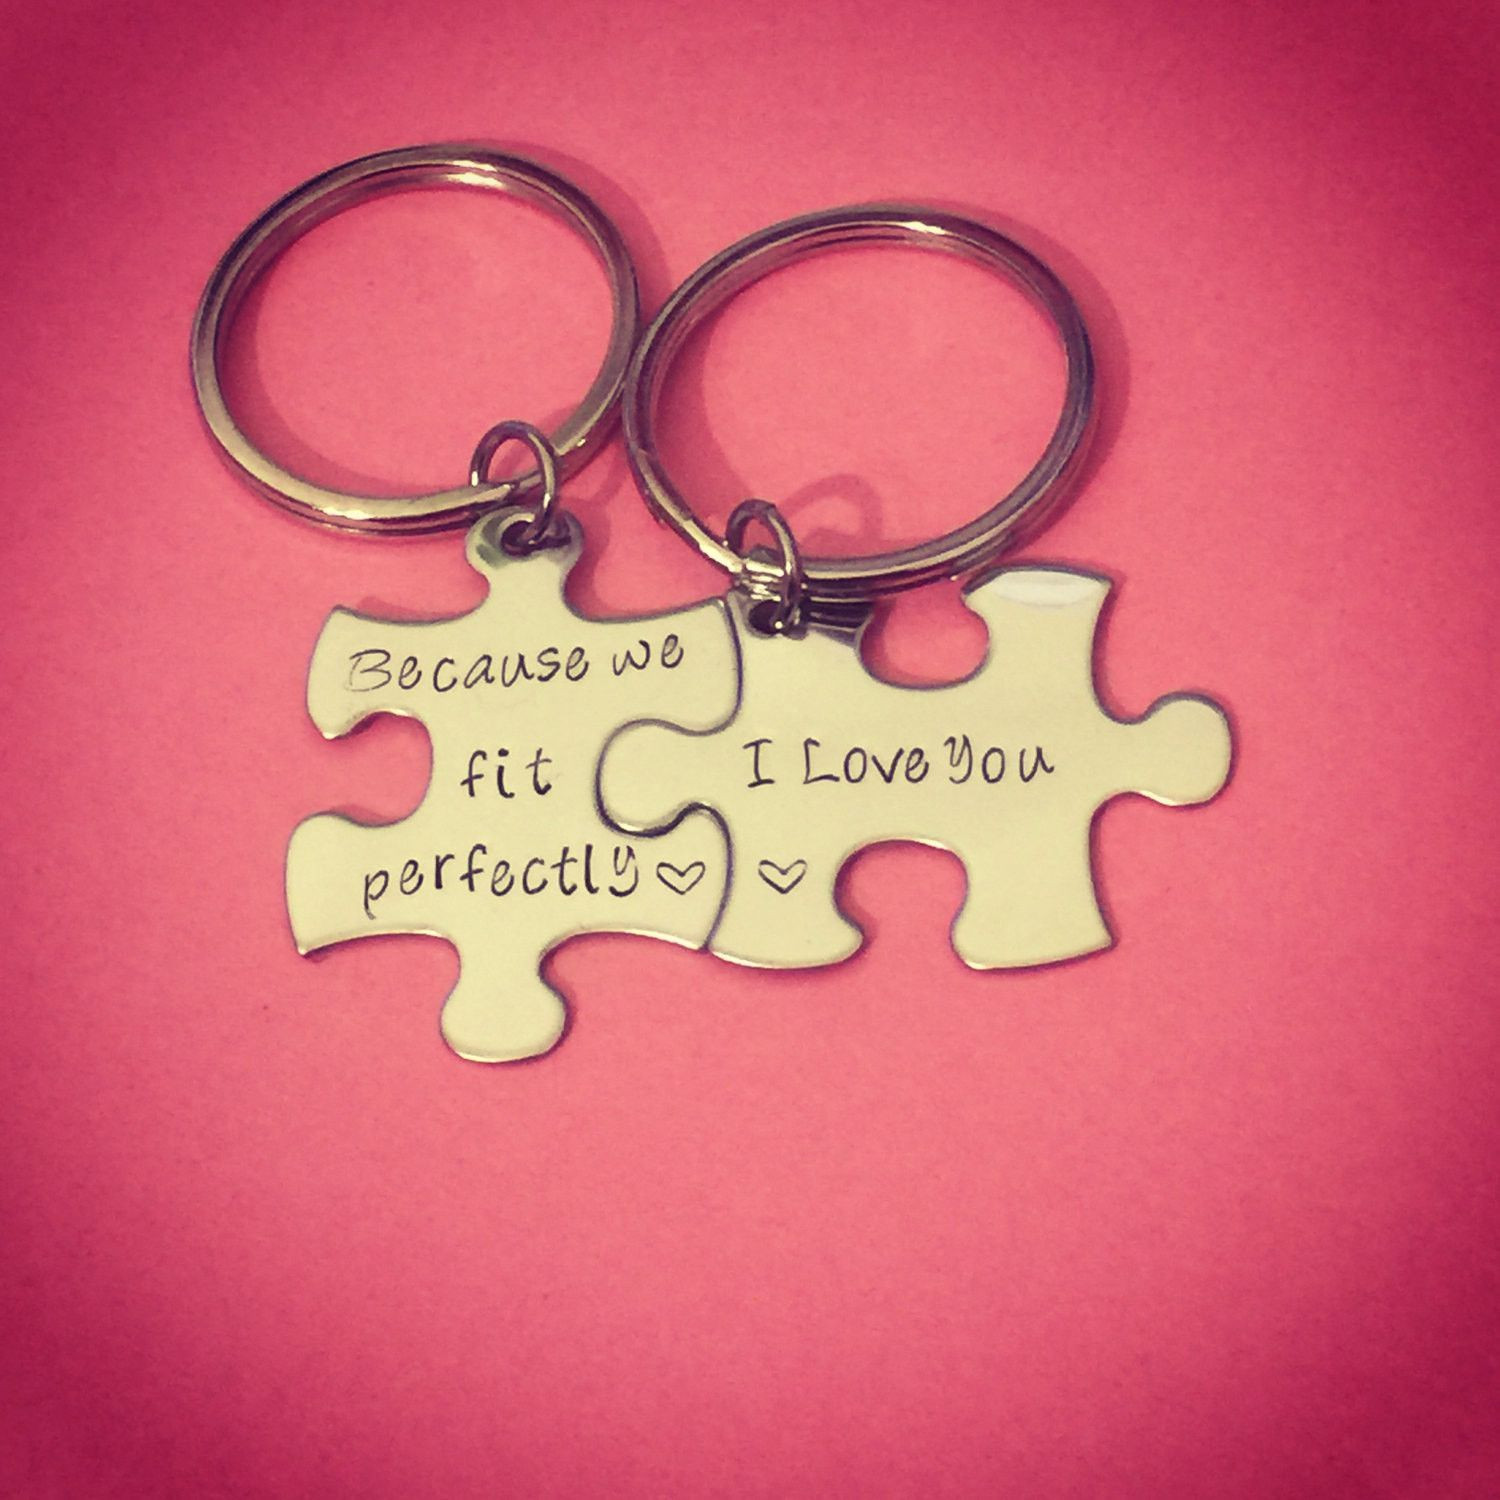 Couple Gift Ideas Your Boyfriend
 Because we fit perfectly i love you Couples Keychains